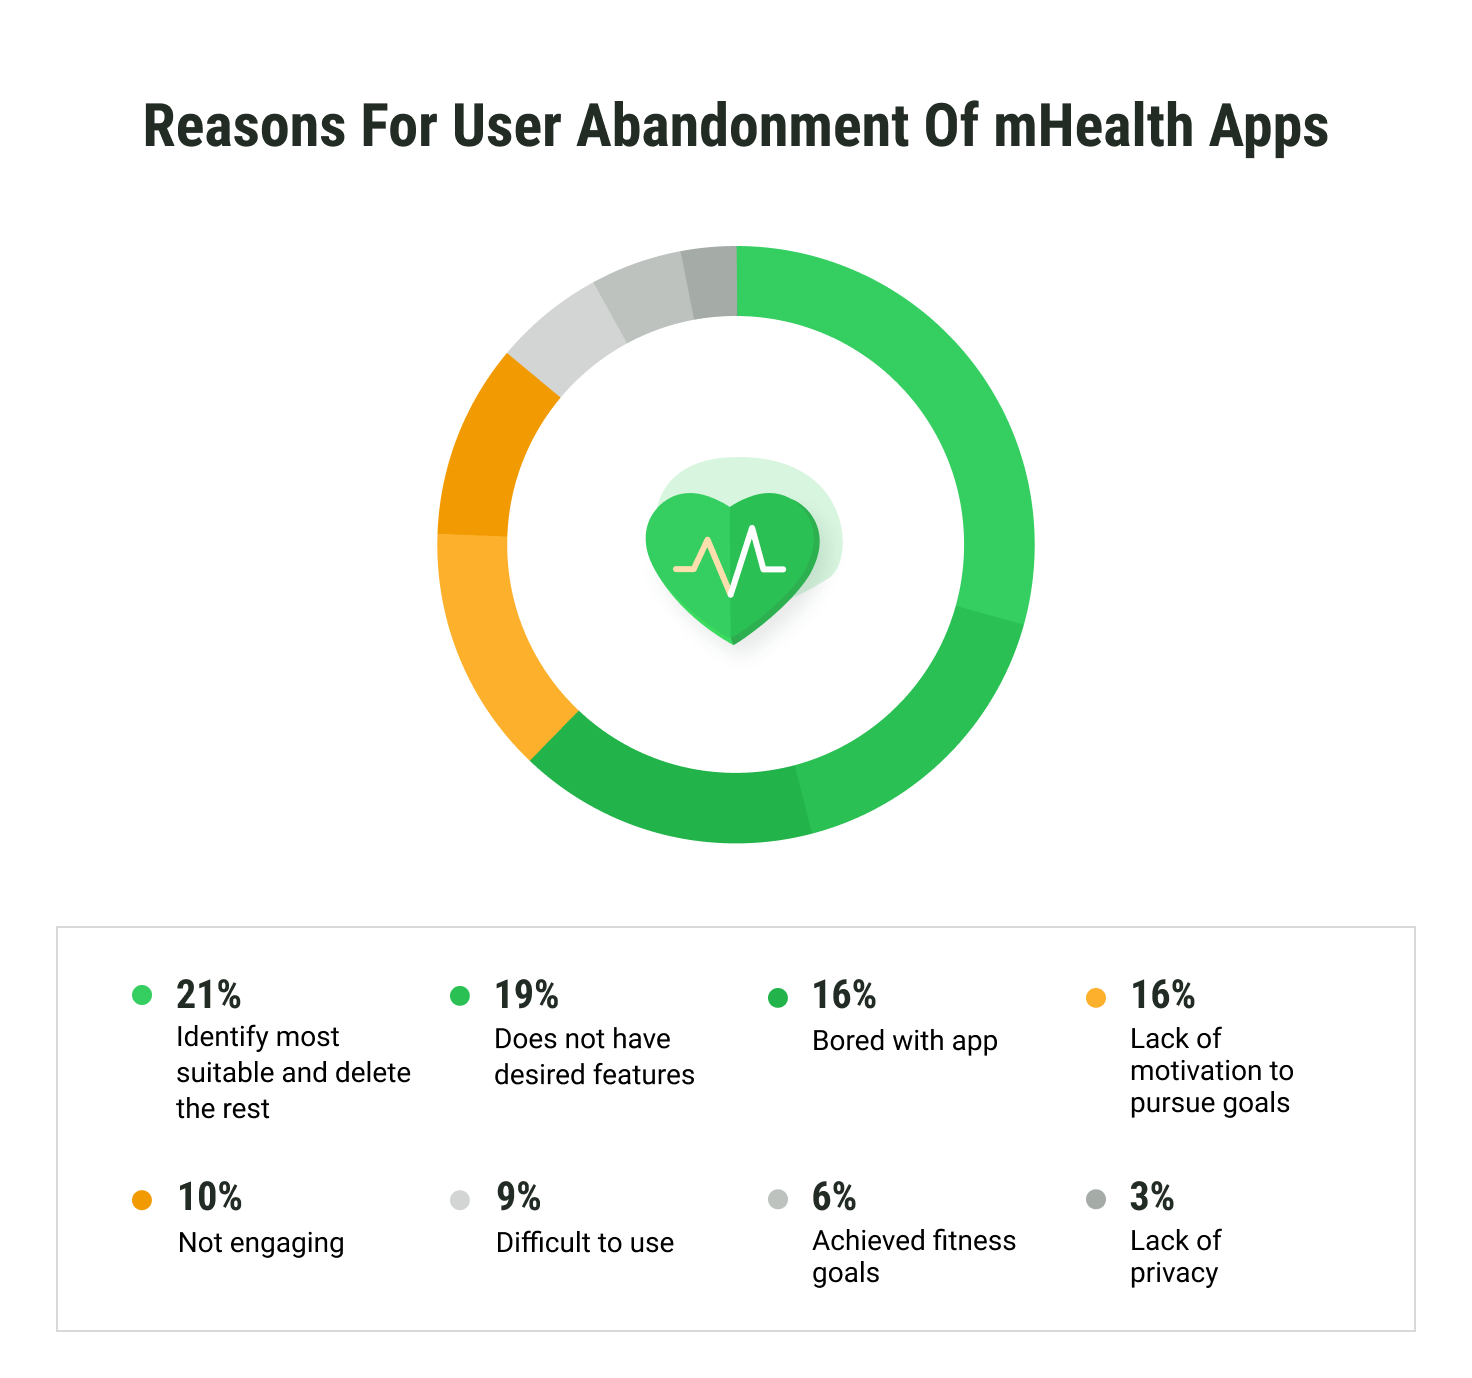 Reasons for User Abandonment of mHealth Apps